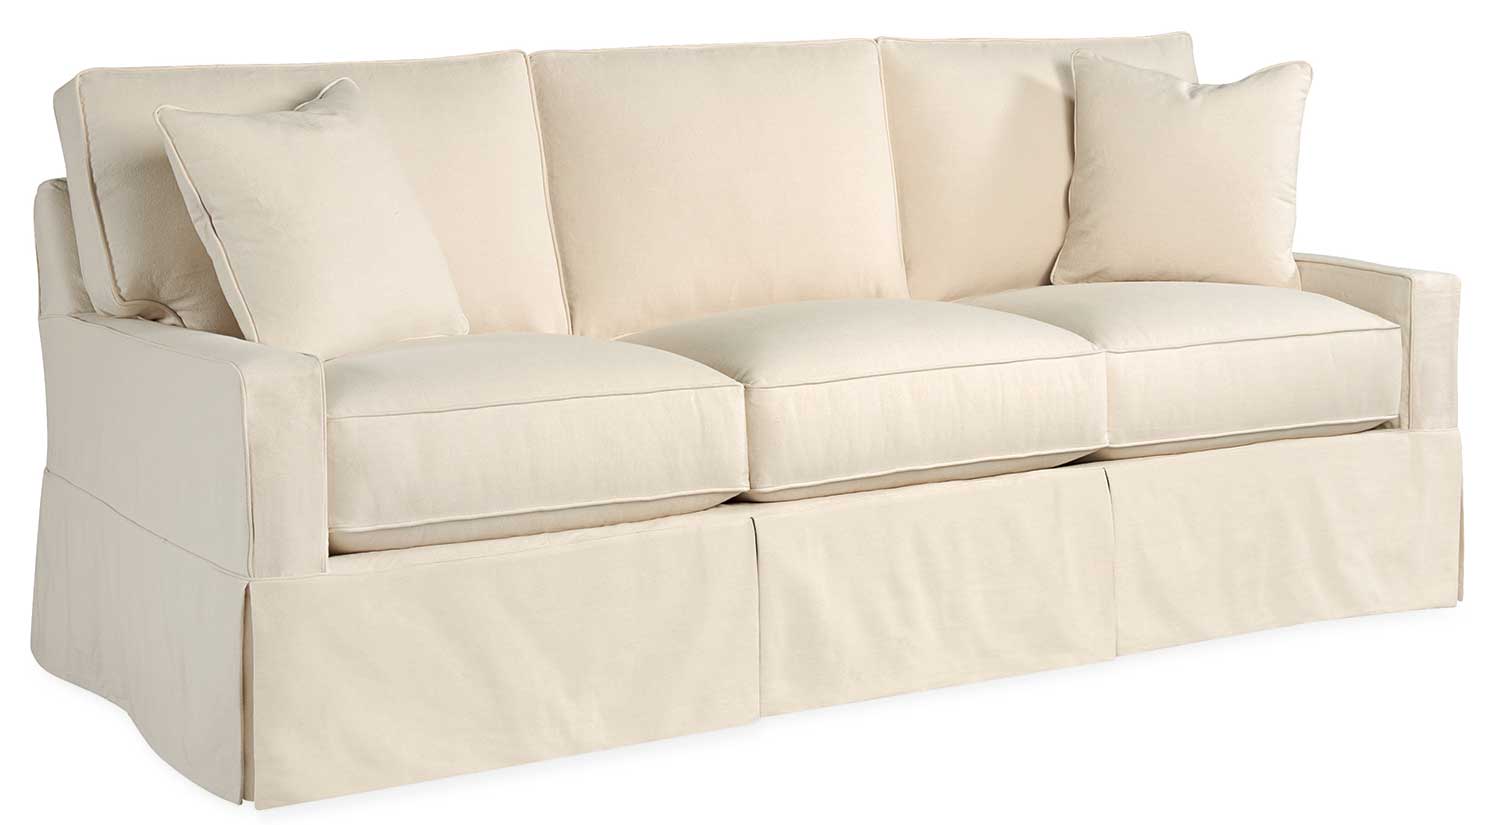 Slipcover Sofas: Everything to Consider Before You Buy